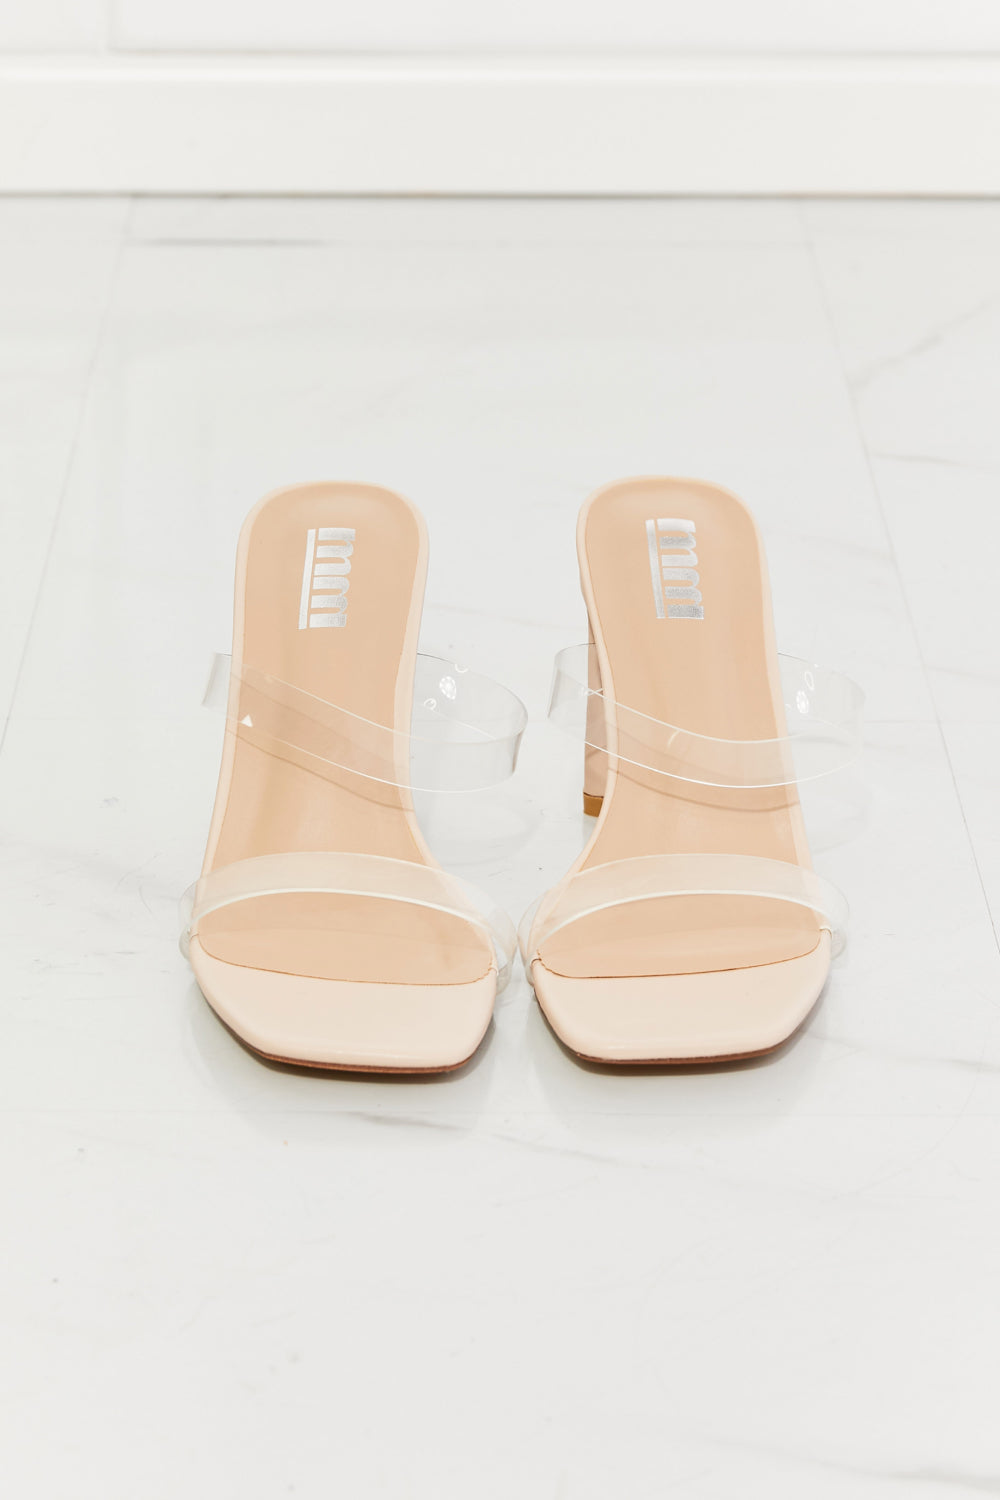 MMShoes - Beige - Walking On Air Transparent Double Band Heeled Sandal - Sizes 6-11 Ti Amo I love you